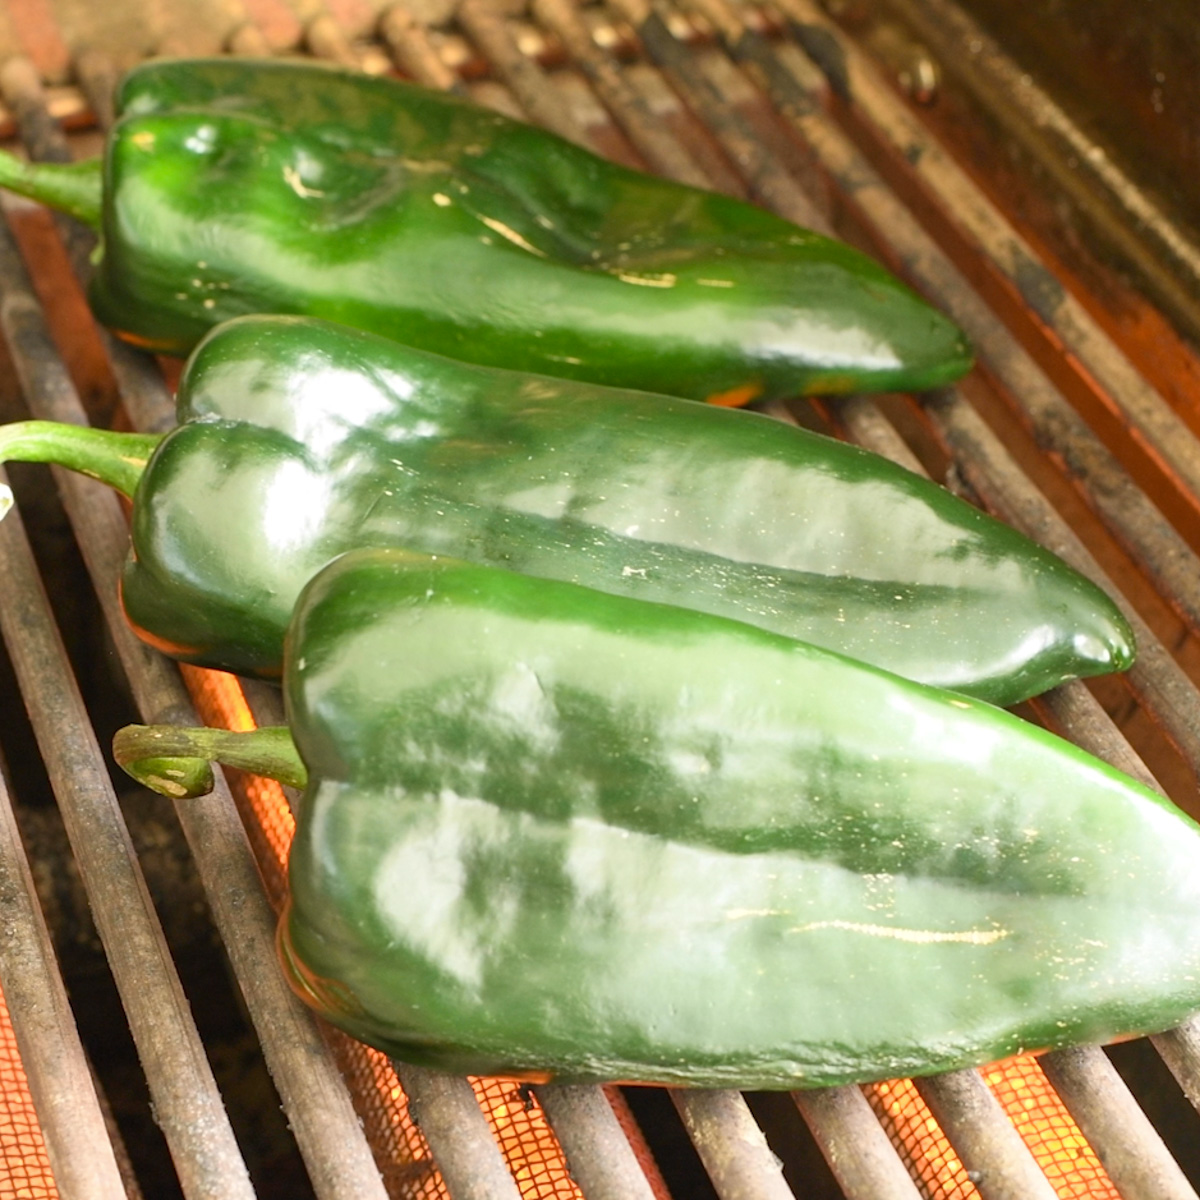 Char the peppers on a hot grill.